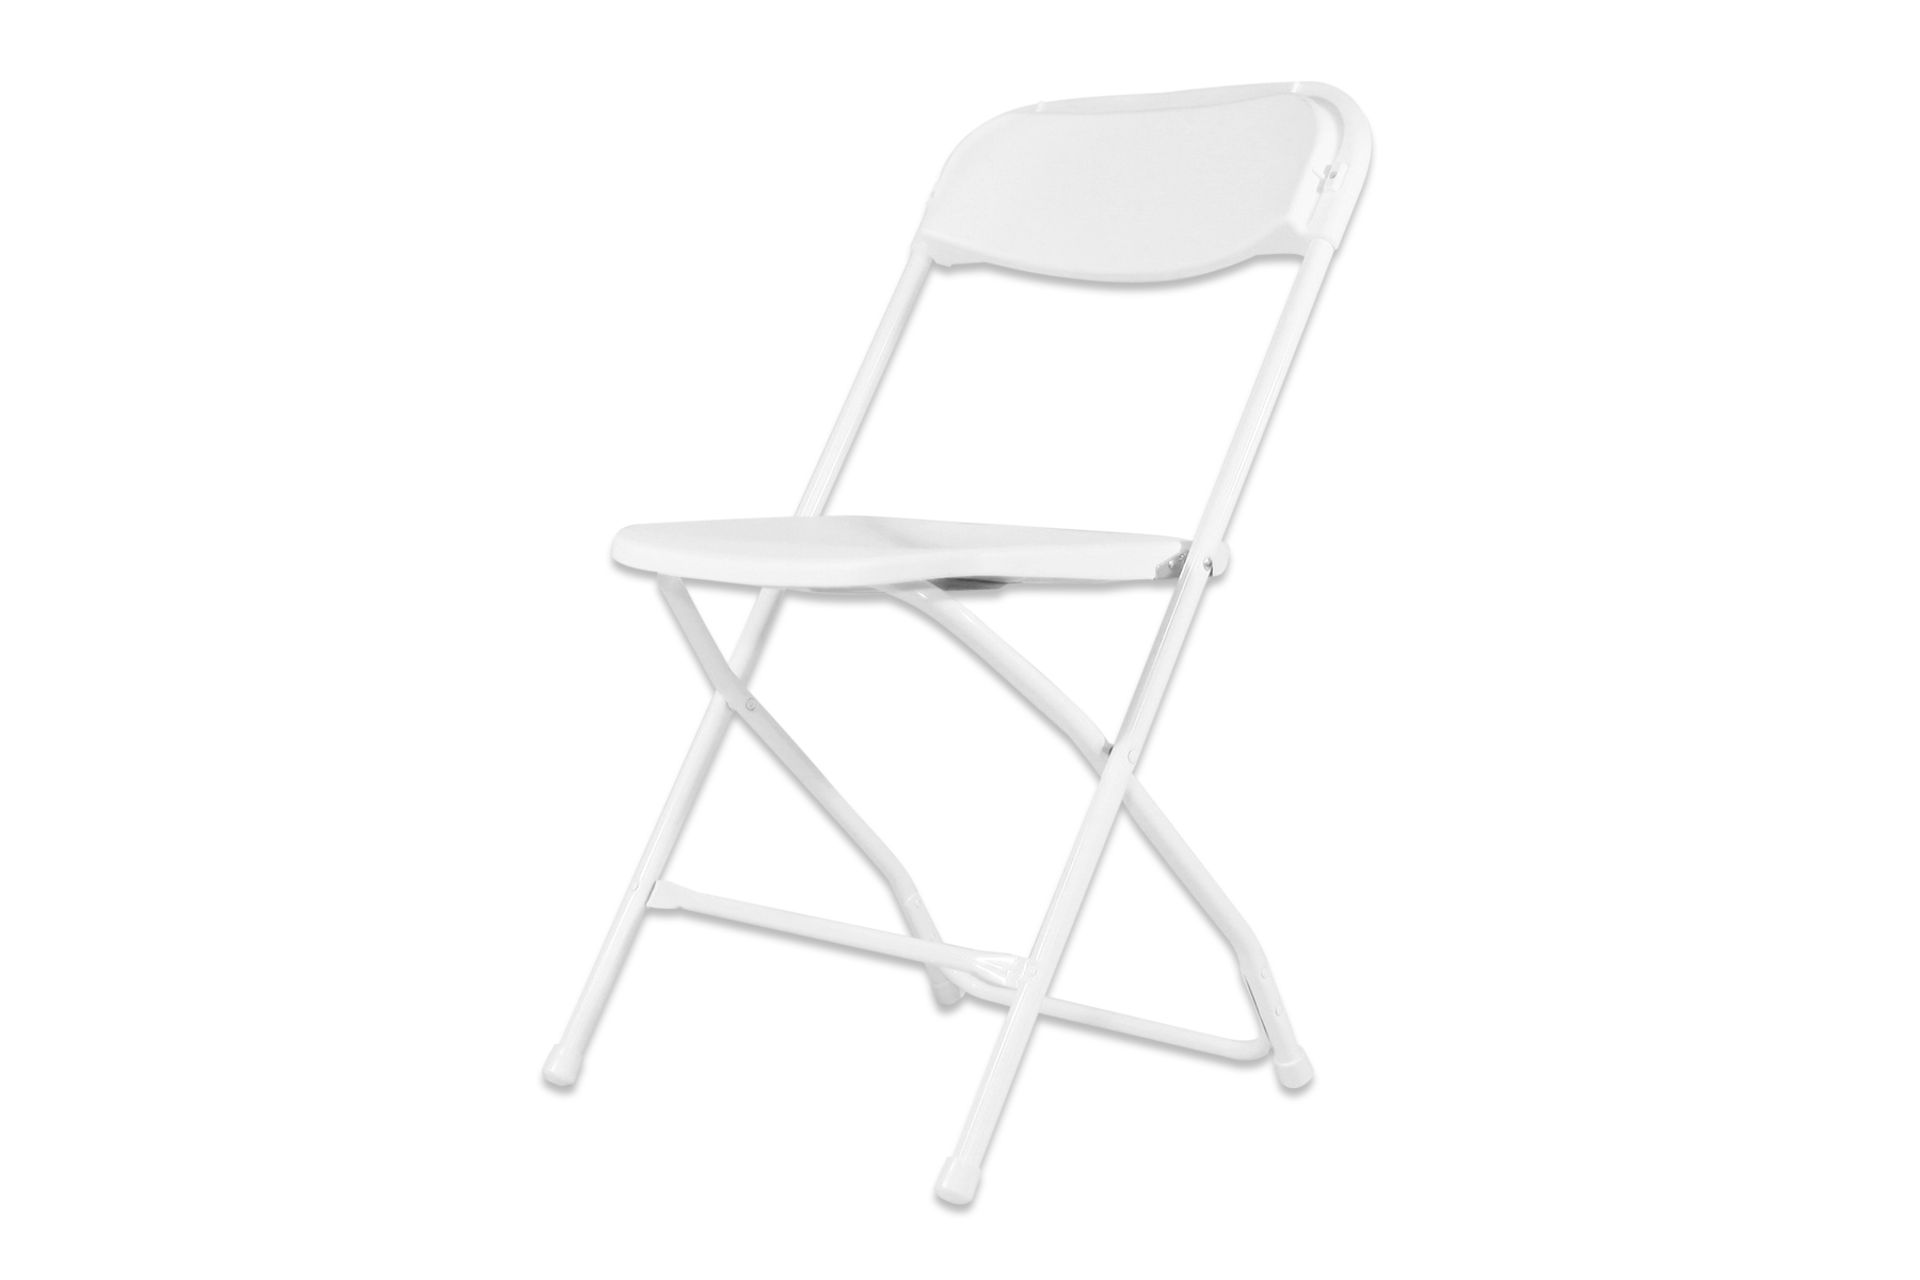 V *TRADE QTY* Grade A Folding Plastic Chair - White X1800 YOUR BID PRICE TO BE MULTIPLIED